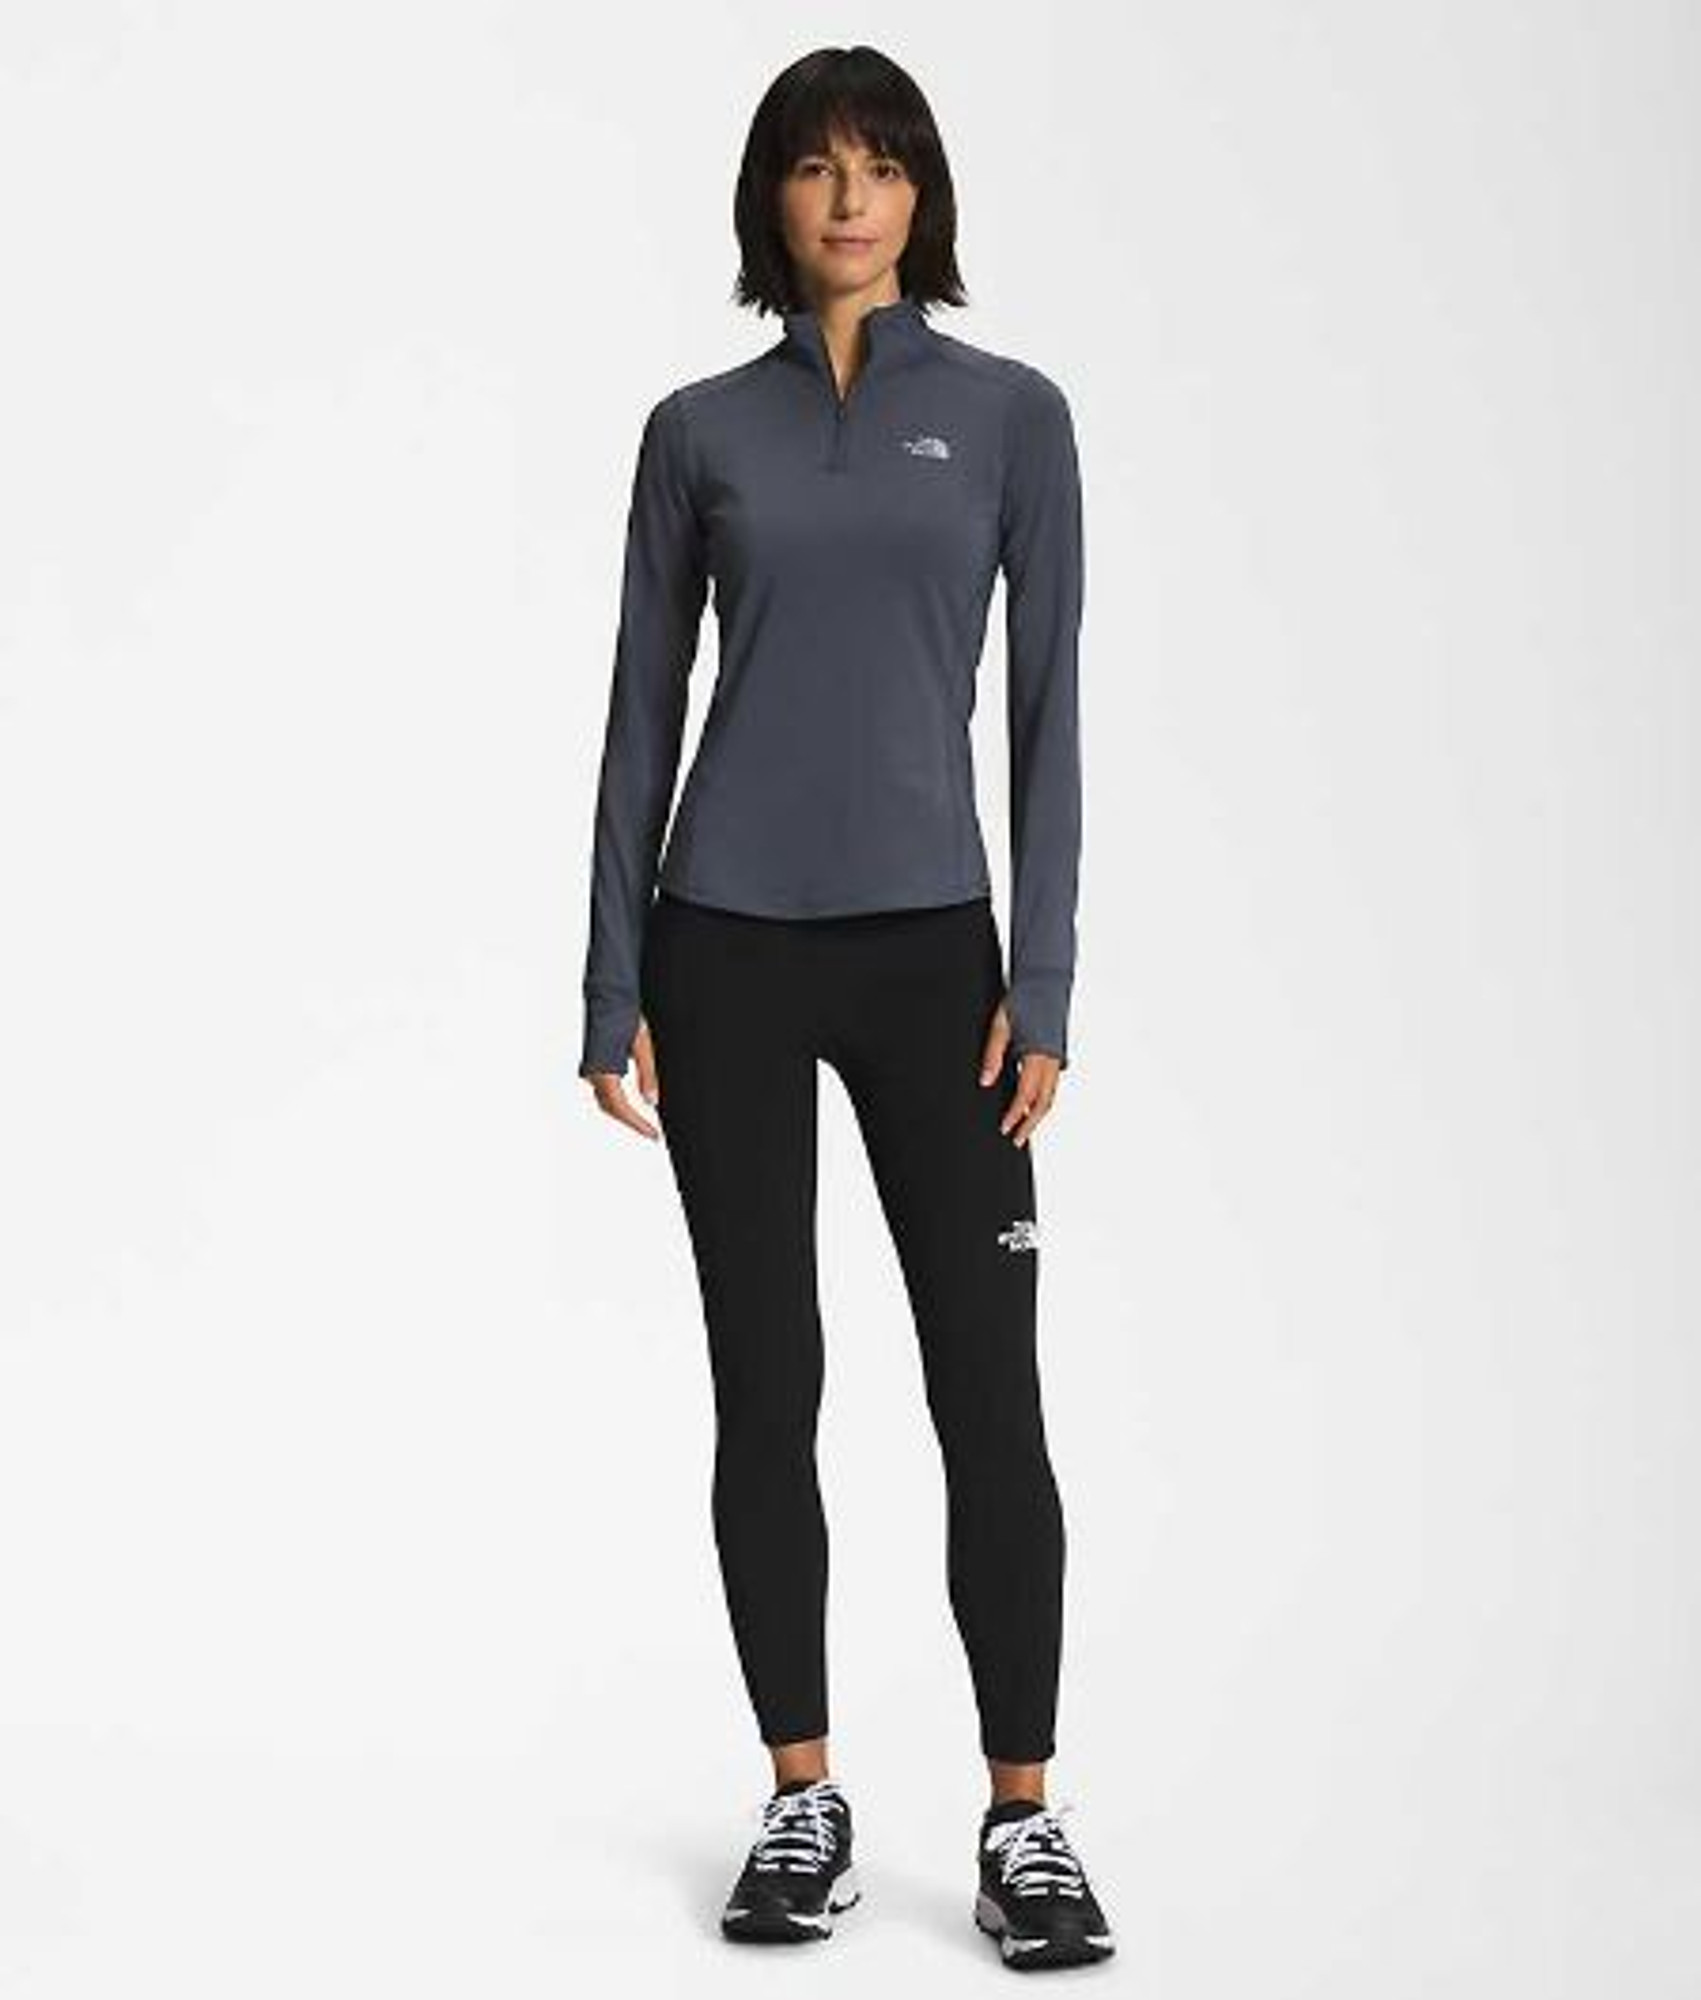 The North Face Women's Winter Warm Pro Tight - High Mountain Sports